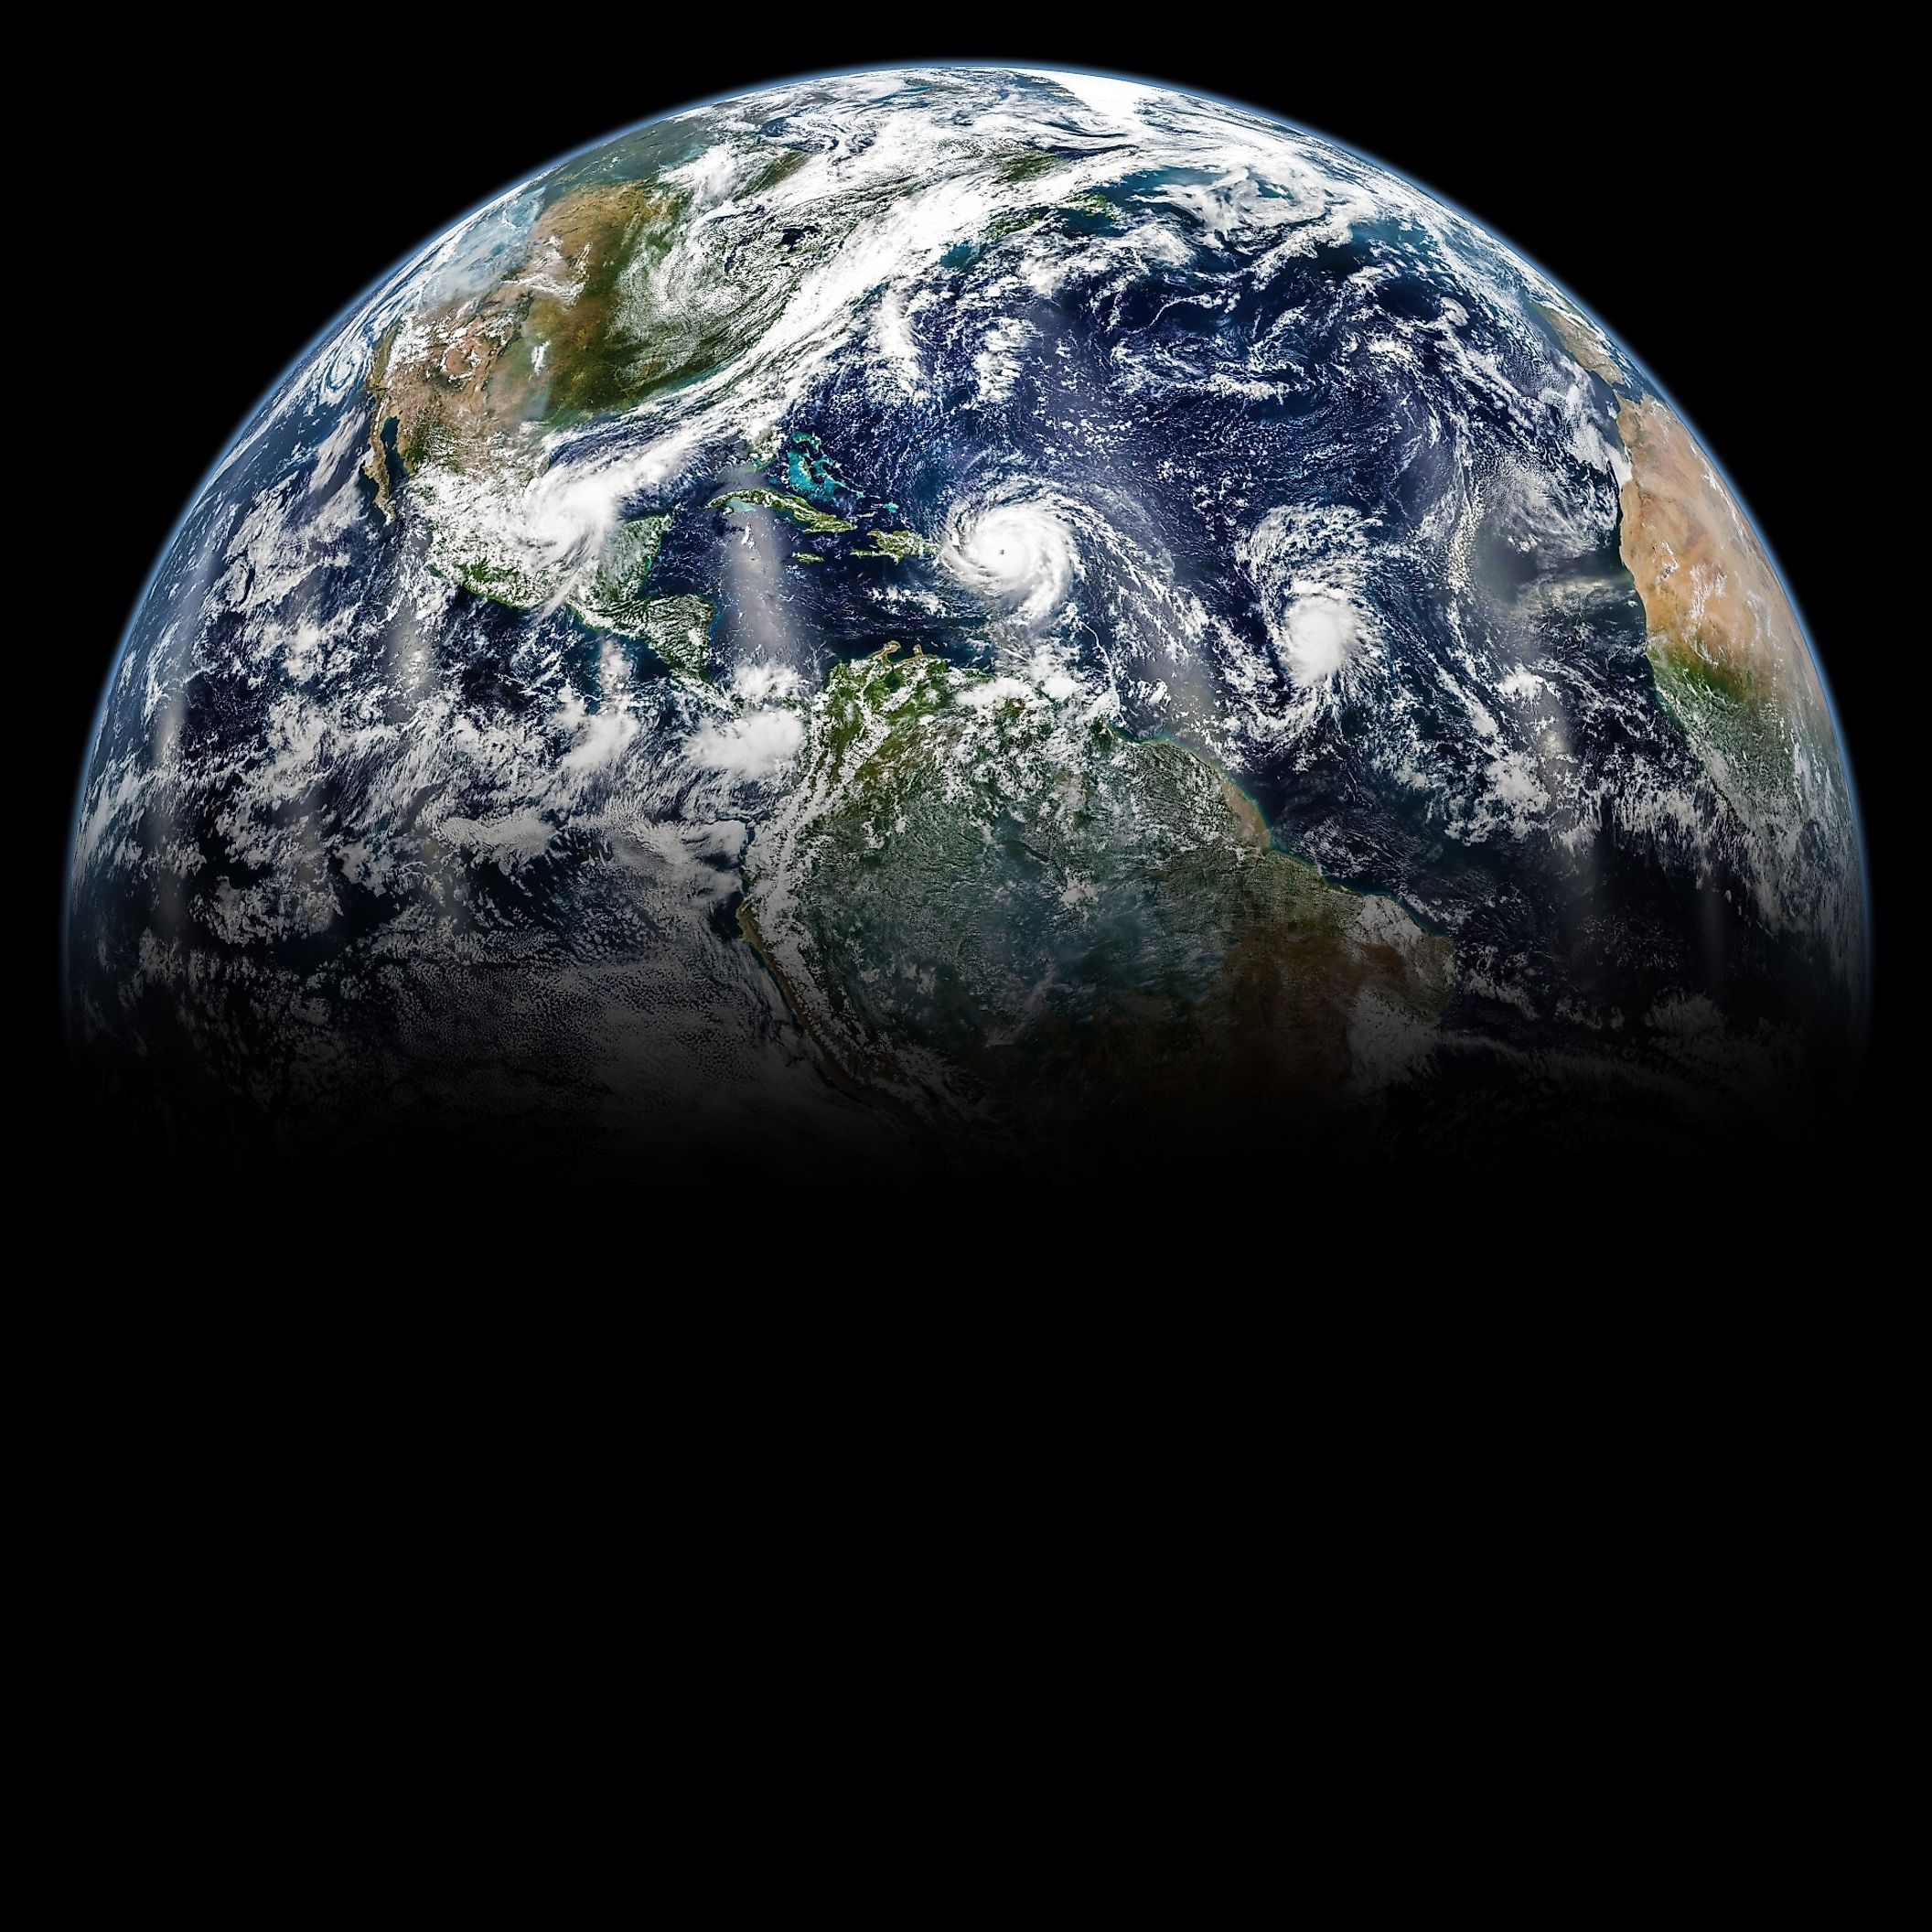 View of the Earth from space. Image credit: NASA